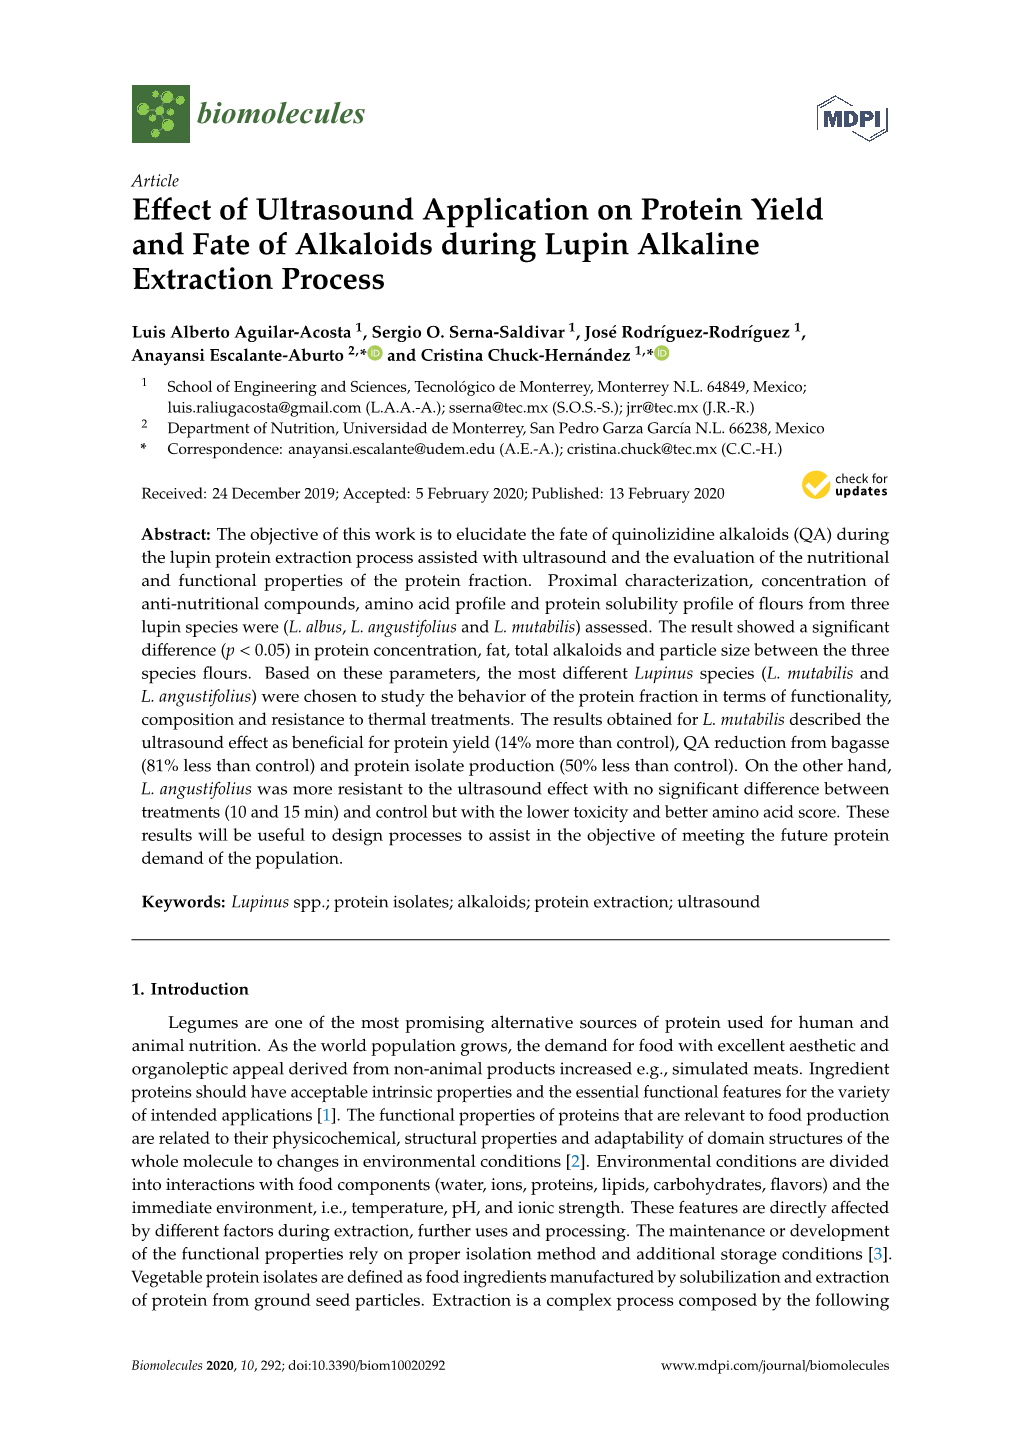 Effect of Ultrasound Application on Protein Yield and Fate of Alkaloids